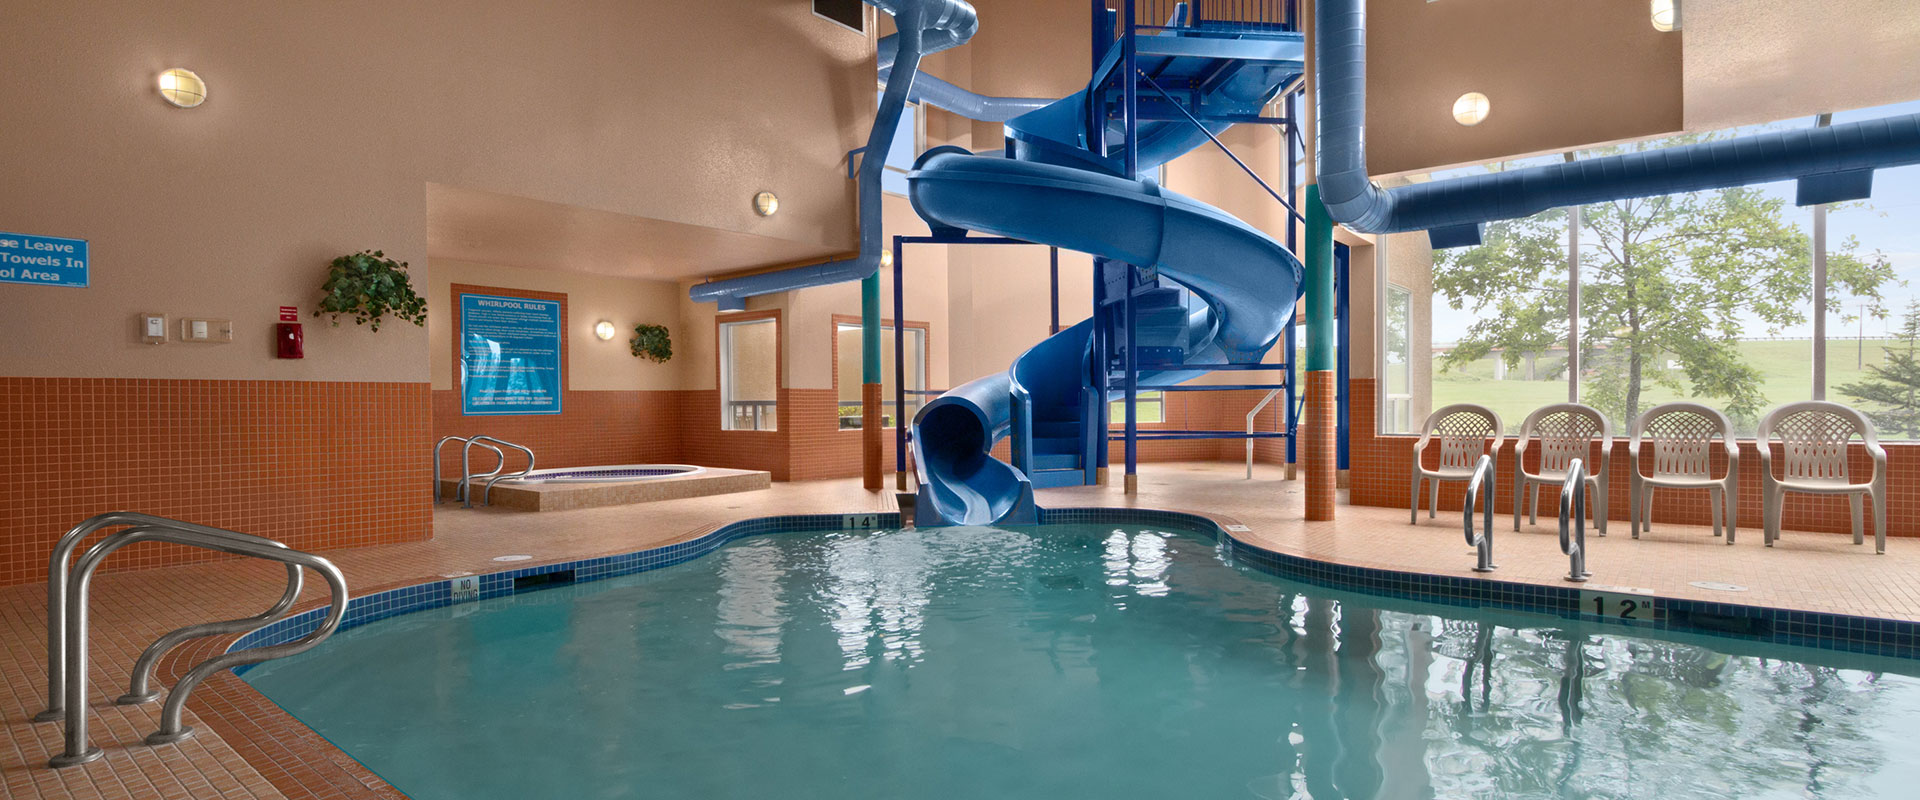 Heated indoor pool with a large waterslide and hot tub at Days Inn Red Deer, Alberta.
